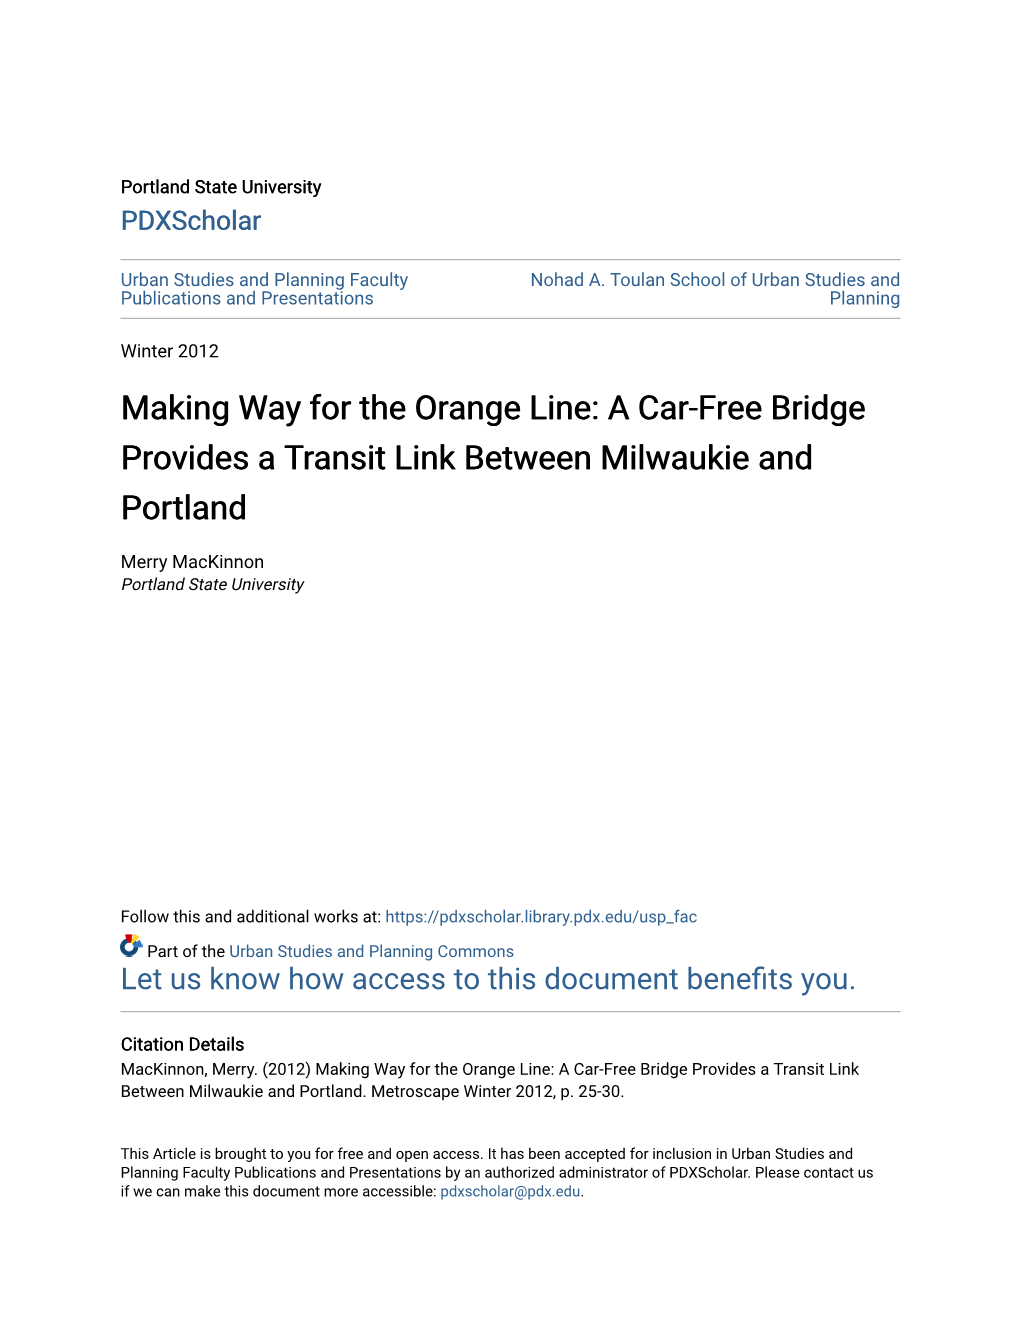 Making Way for the Orange Line: a Car-Free Bridge Provides a Transit Link Between Milwaukie and Portland